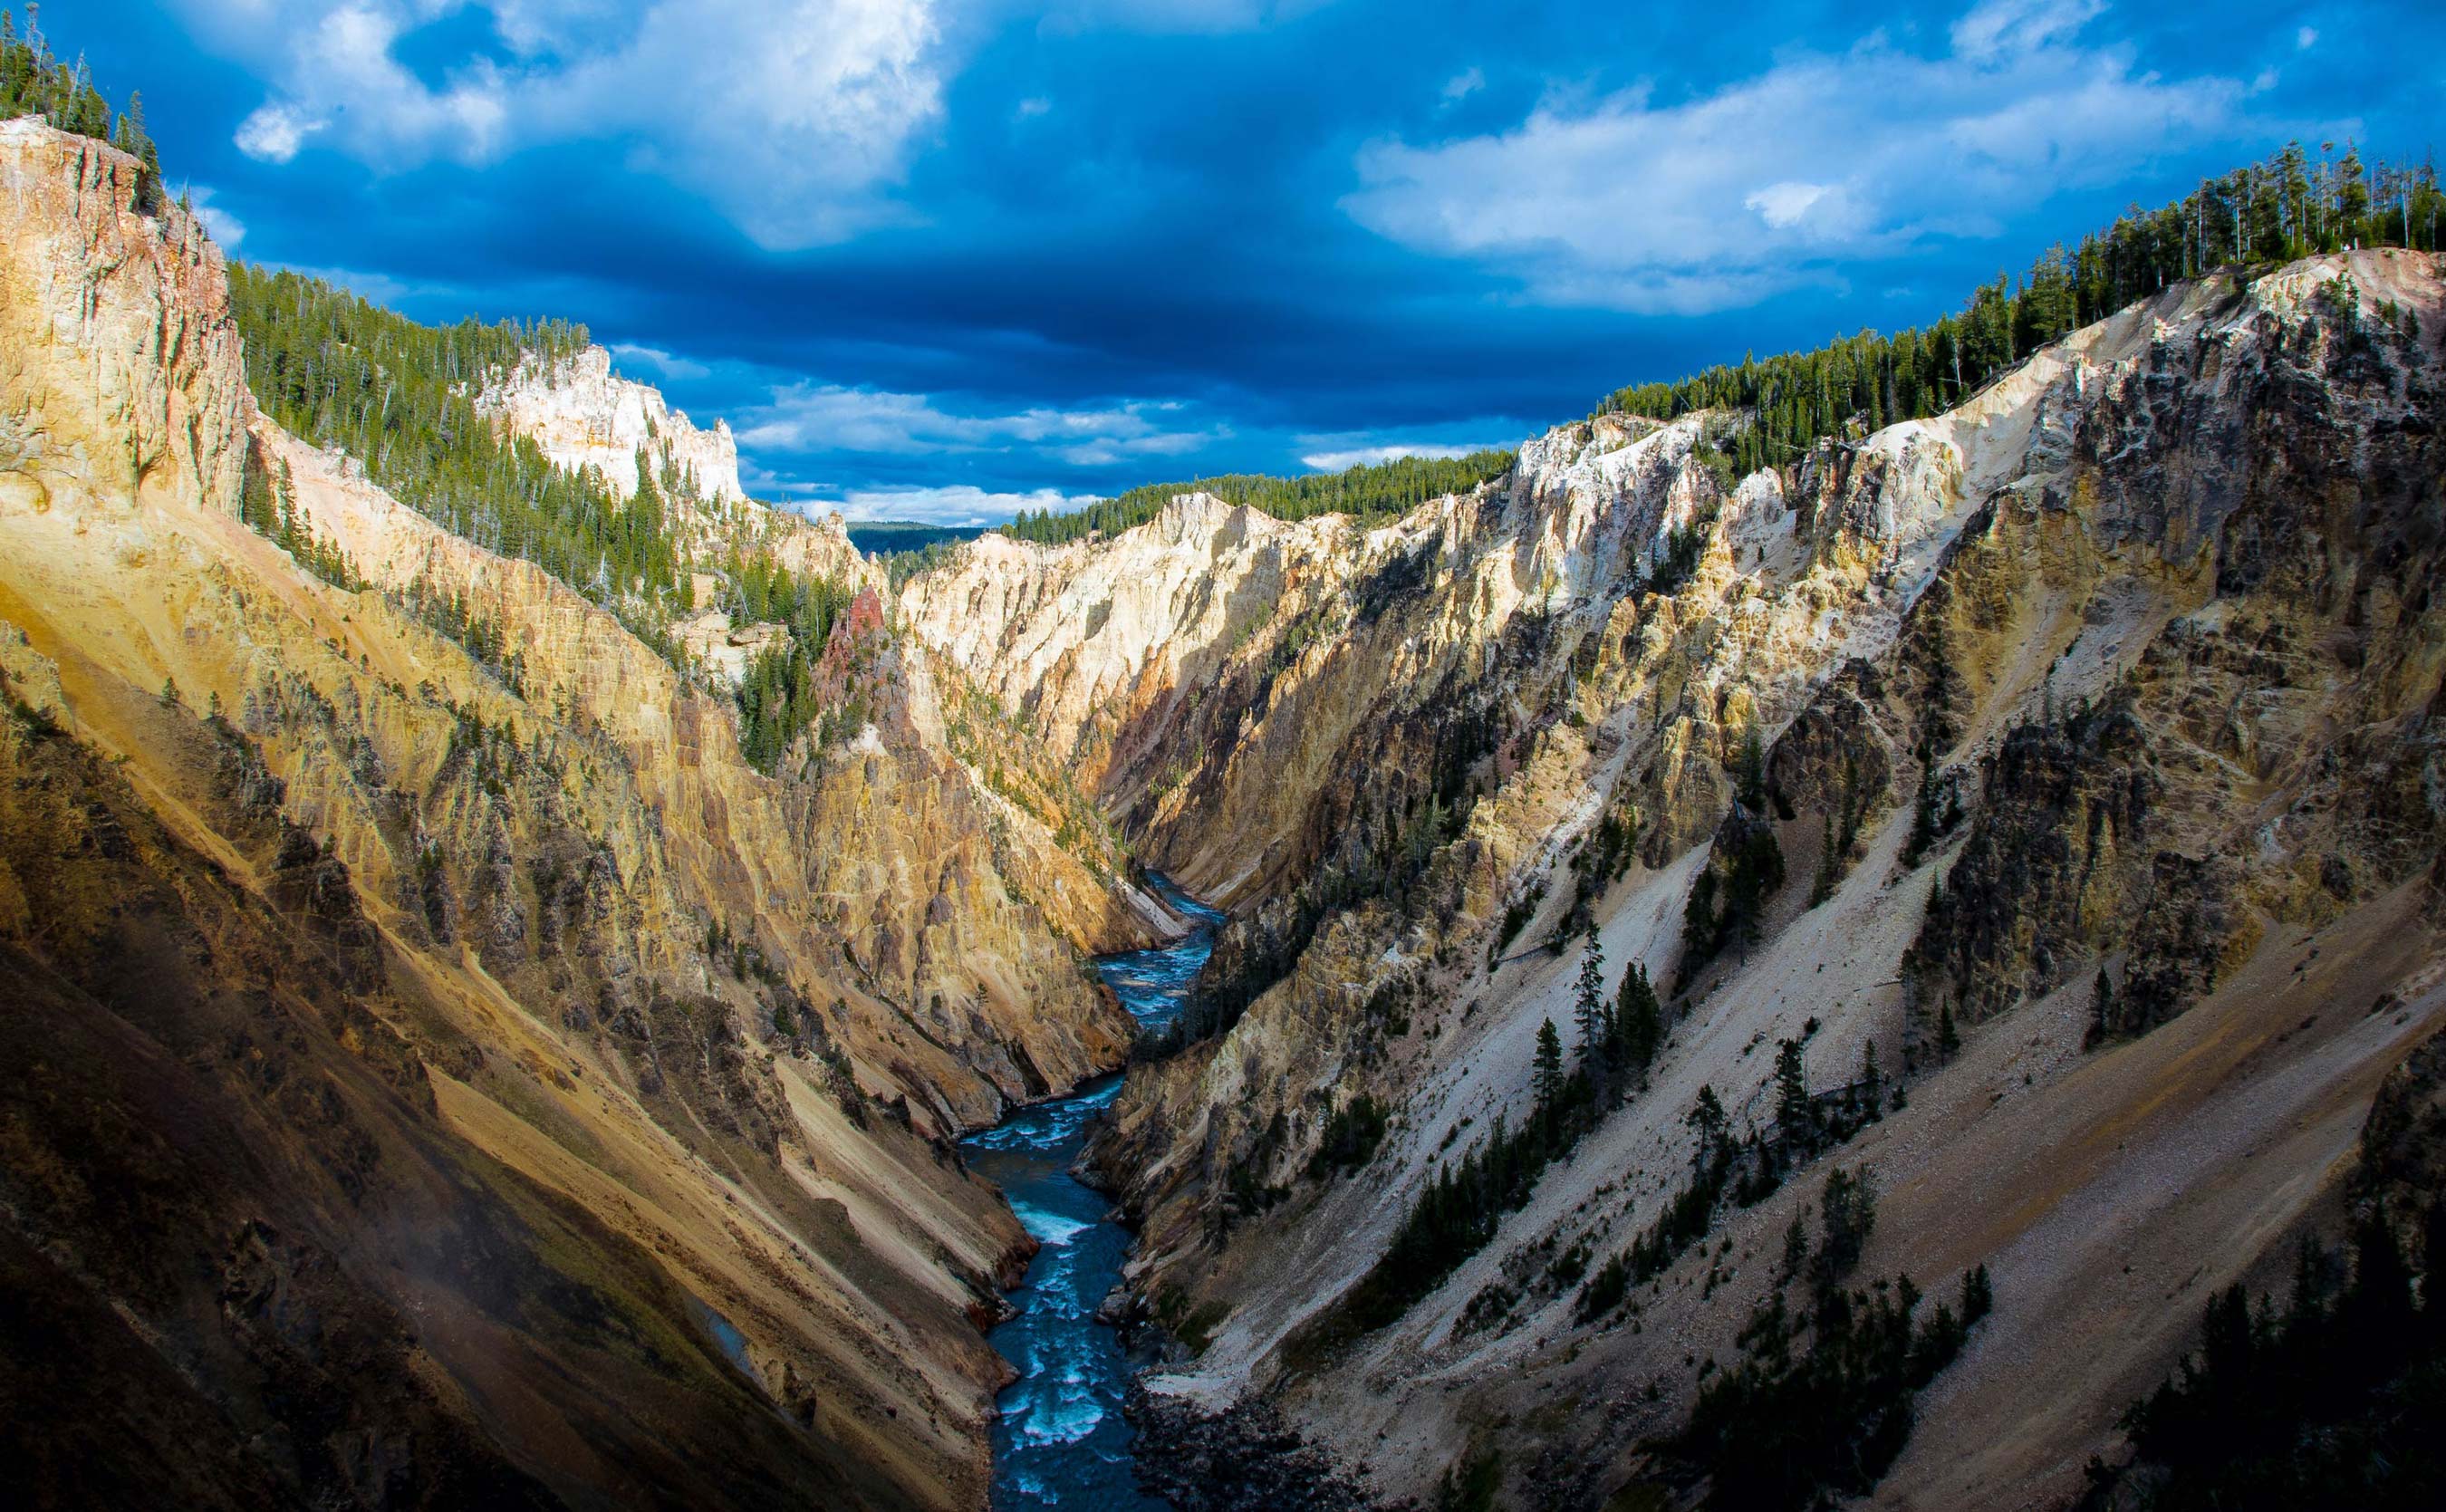 A river runs through Grand Canyon of the Yellowstone in Wyoming.